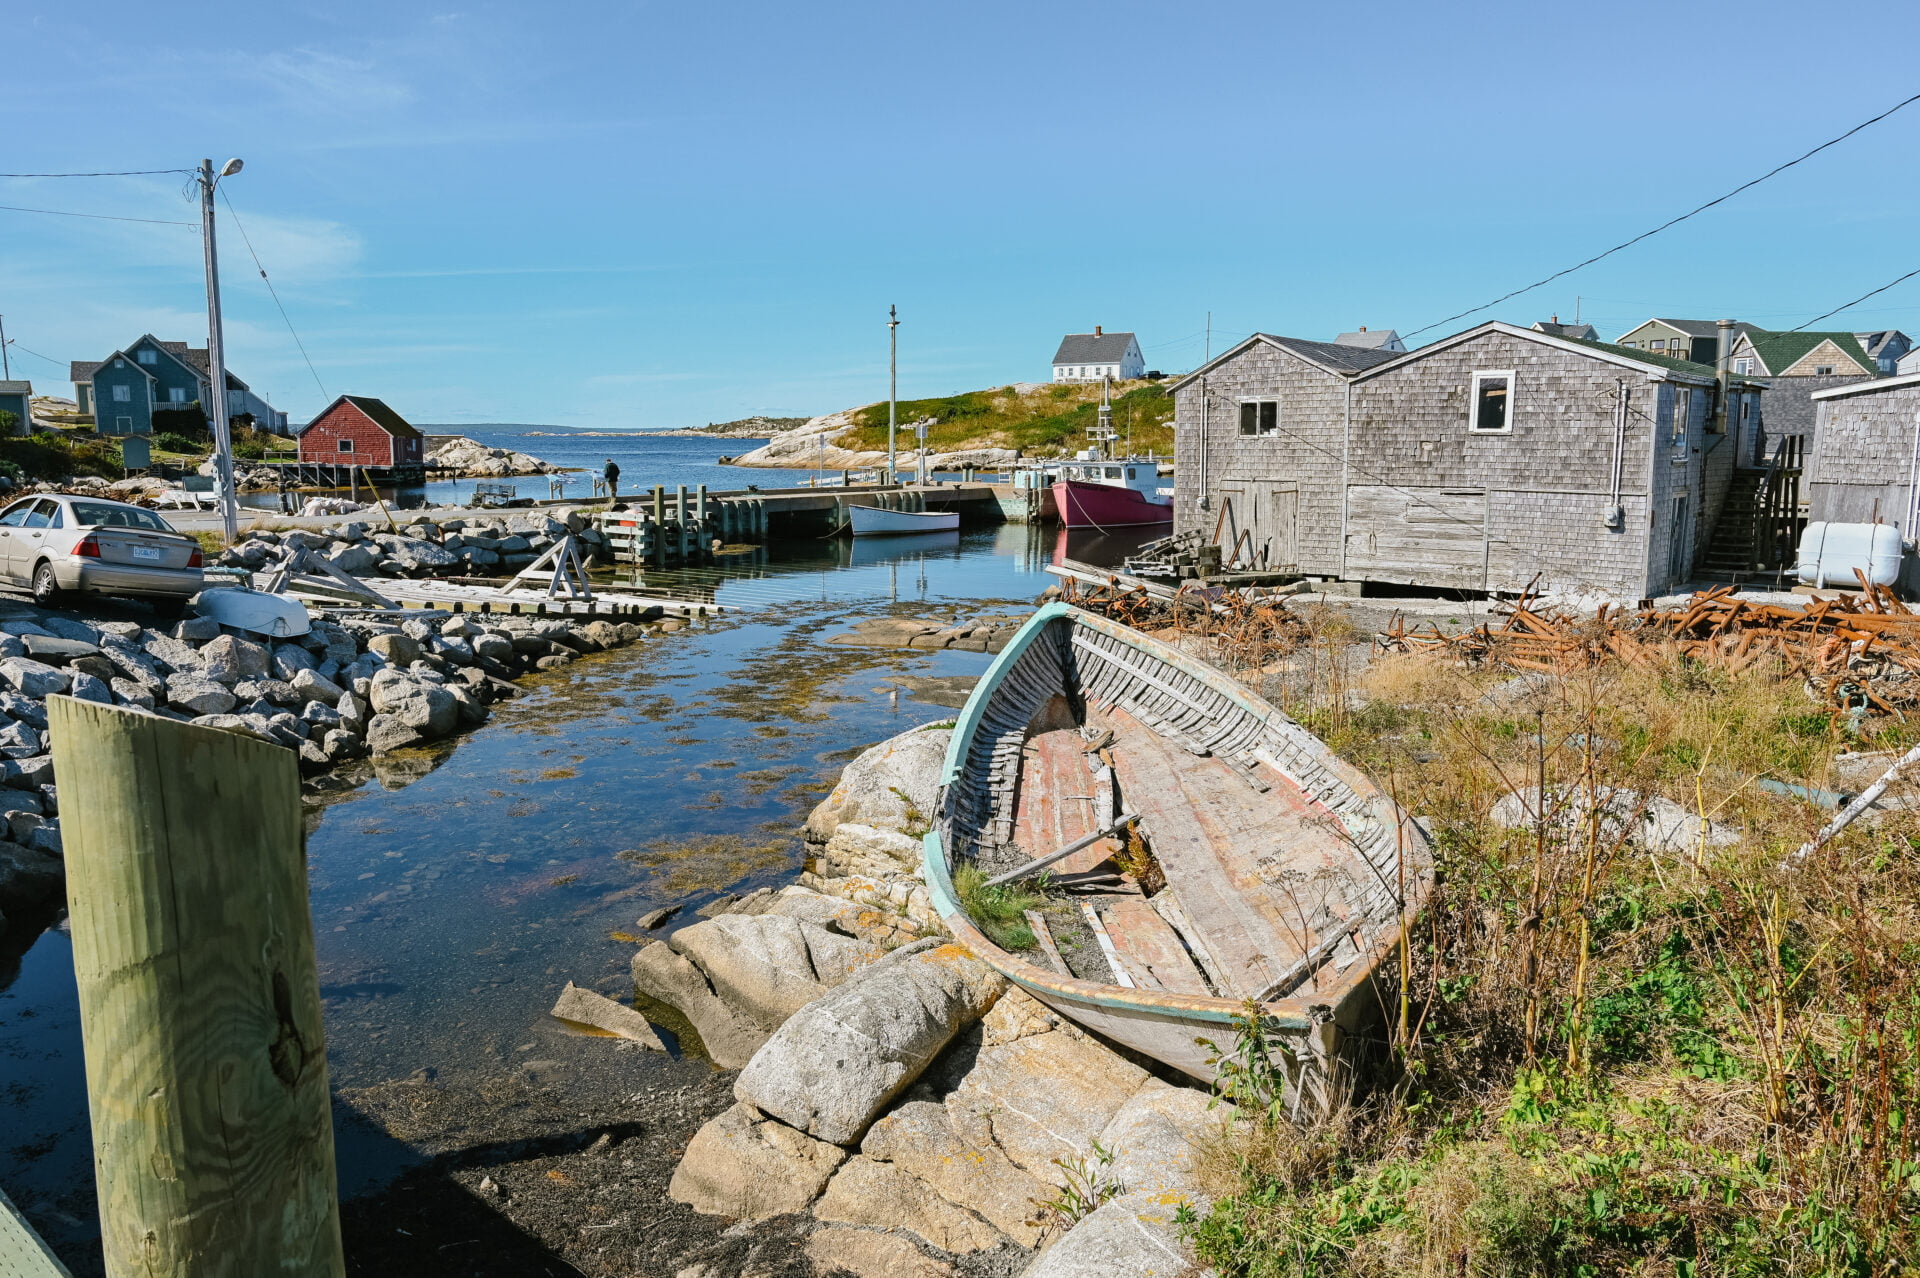 old rotting boat on the edge of the water in the town of peggys cove